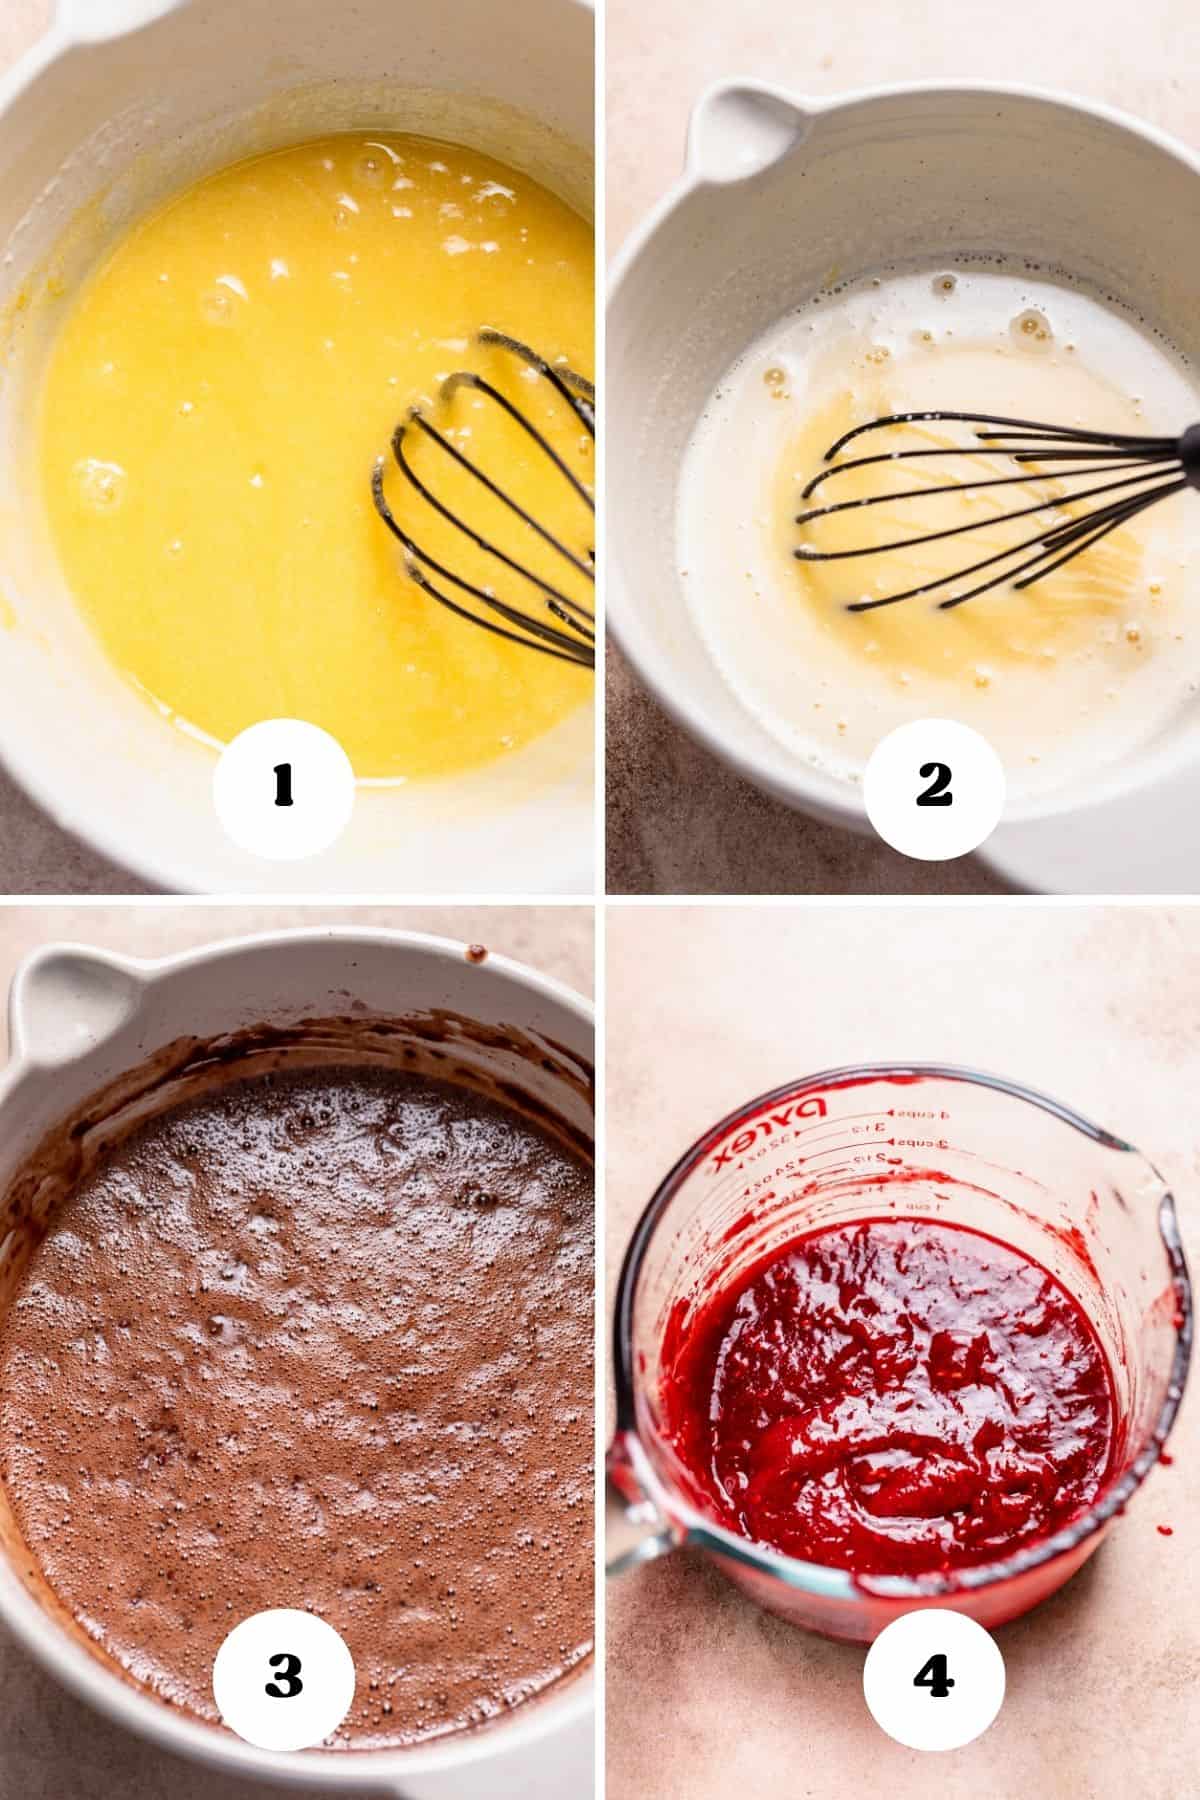 A process collage of the steps for making the chocolate cake batter.